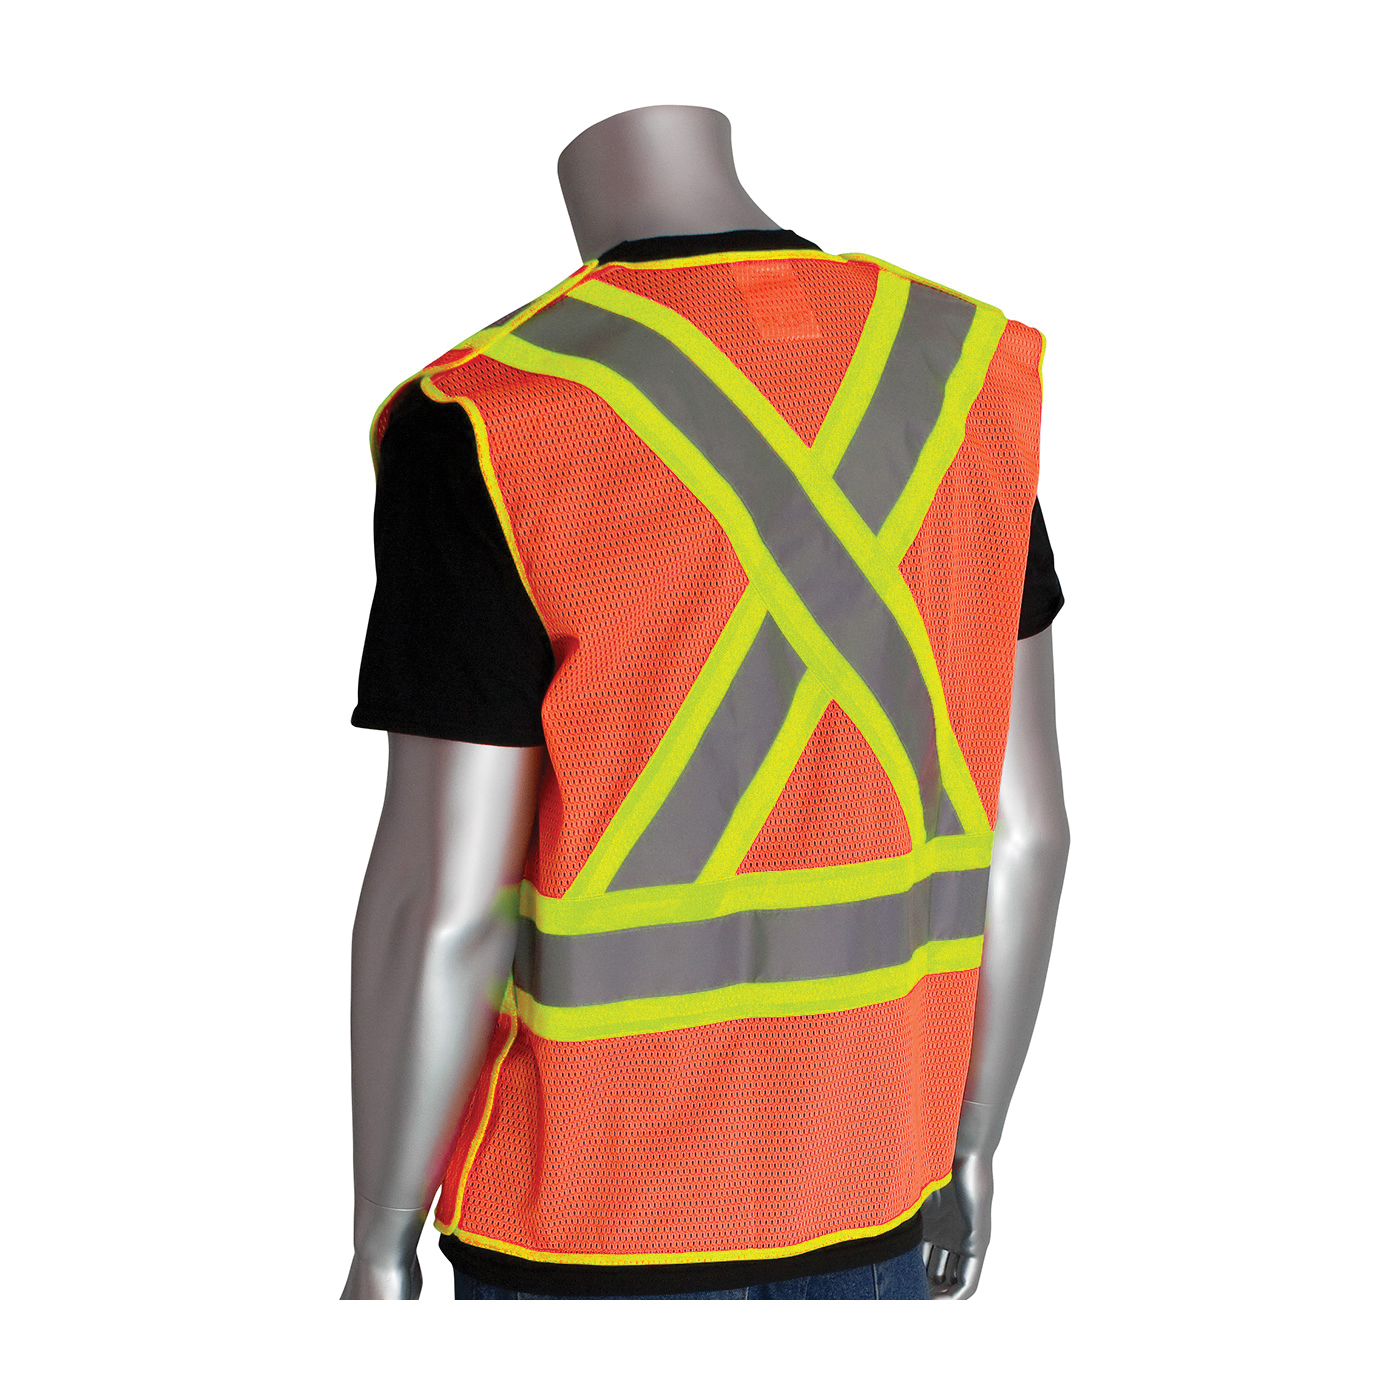 PIP® 302-0211-OR/XL 2-Tone X-Back Safety Vest, XL, Hi-Viz Orange, Polyester Mesh, Hook and Loop Closure, 5 Pockets, ANSI Class: Class 2, Specifications Met: ANSI 107 Type R, CAN/CSA Z96